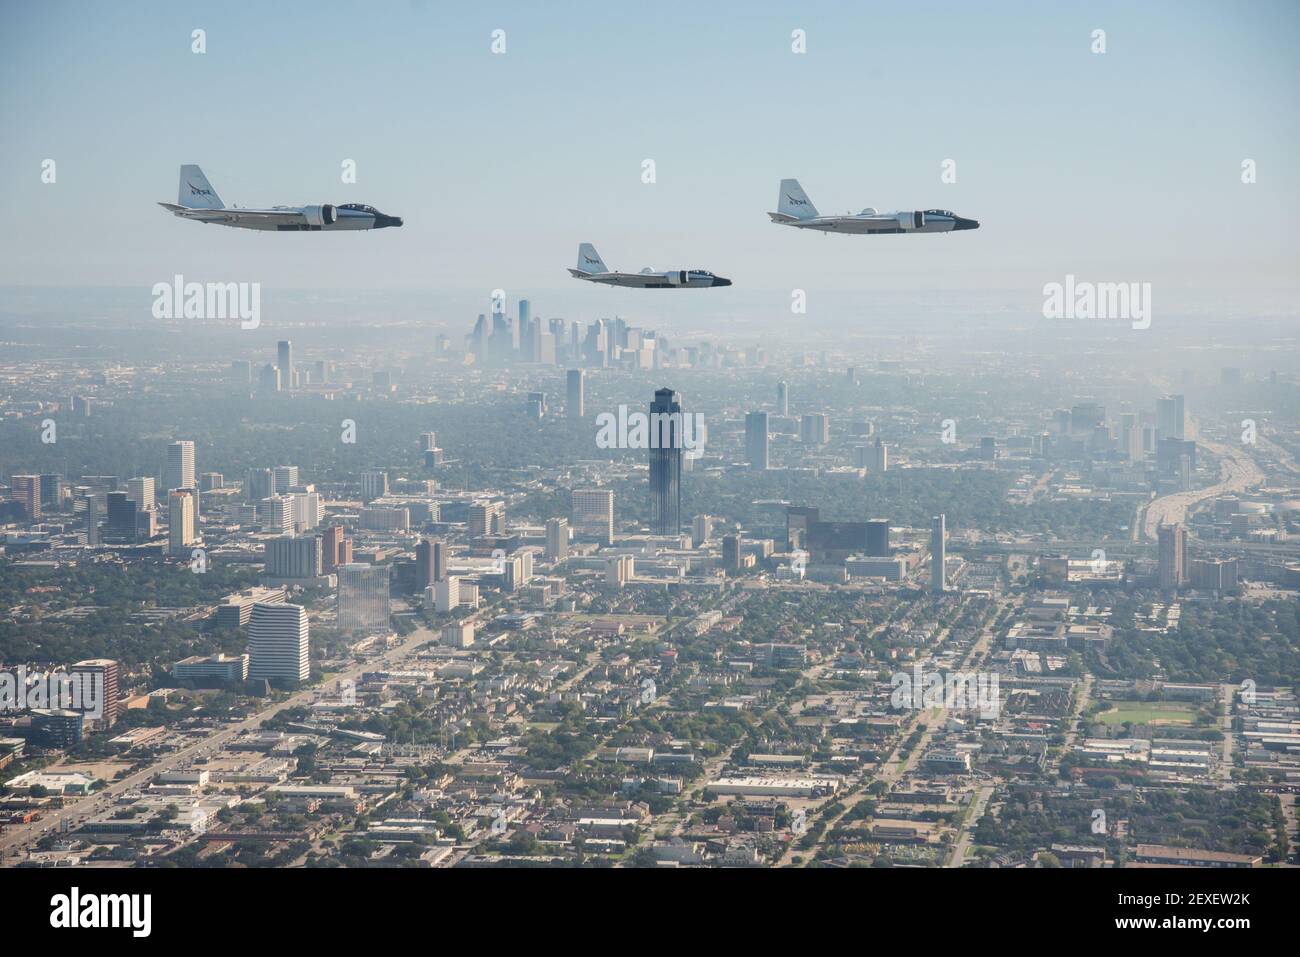 NASA's three WB-57s fly over foggy downtown Houston, Texas during their  historic formation flight over the area on Nov. 19, 2015. This photo flight  was the first time that all three WB-57s